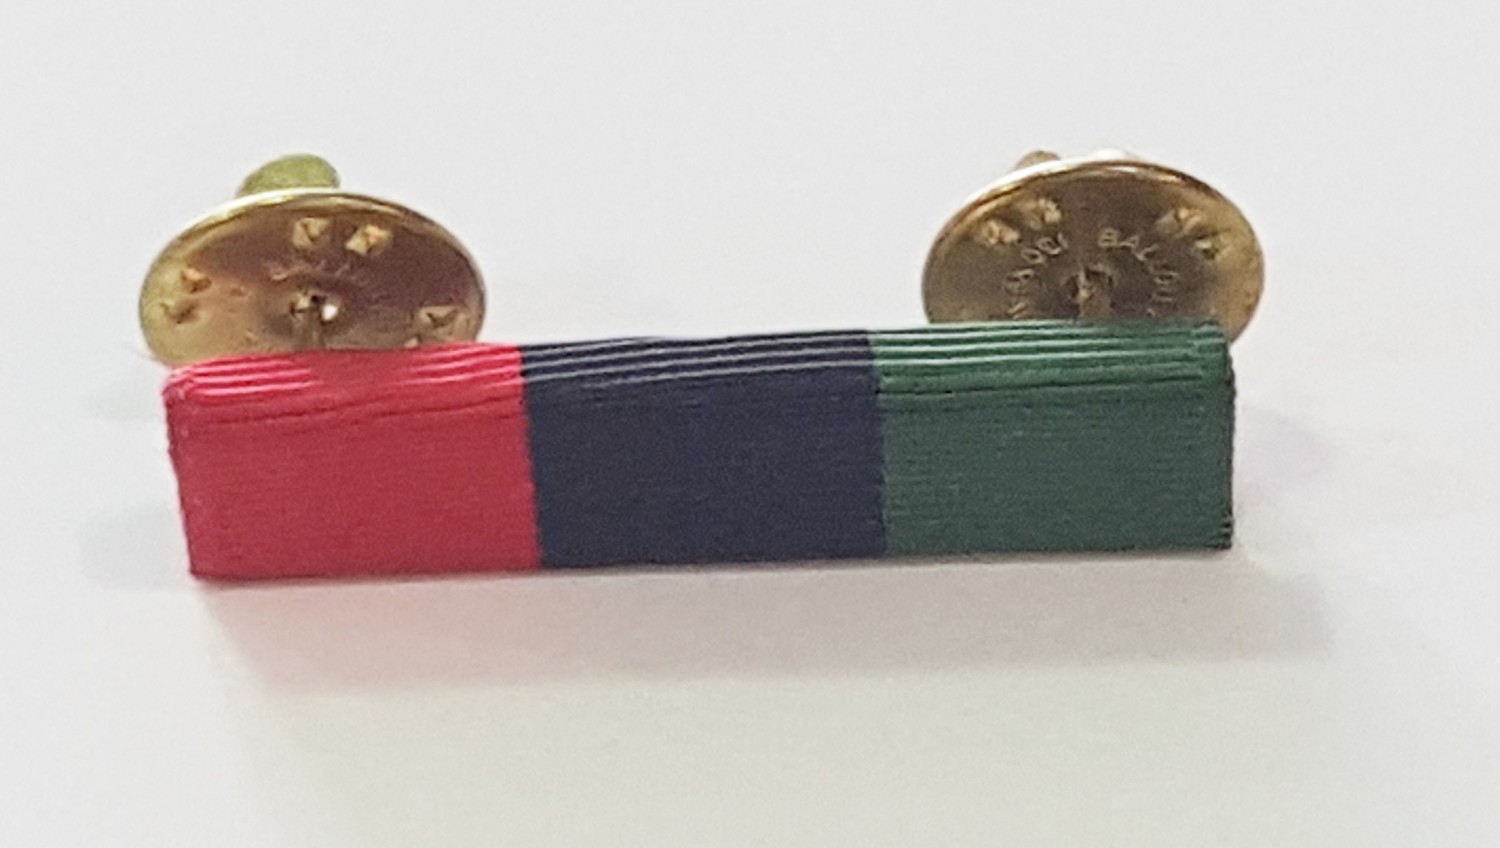 Red, Black, and Green (RBG) Pin